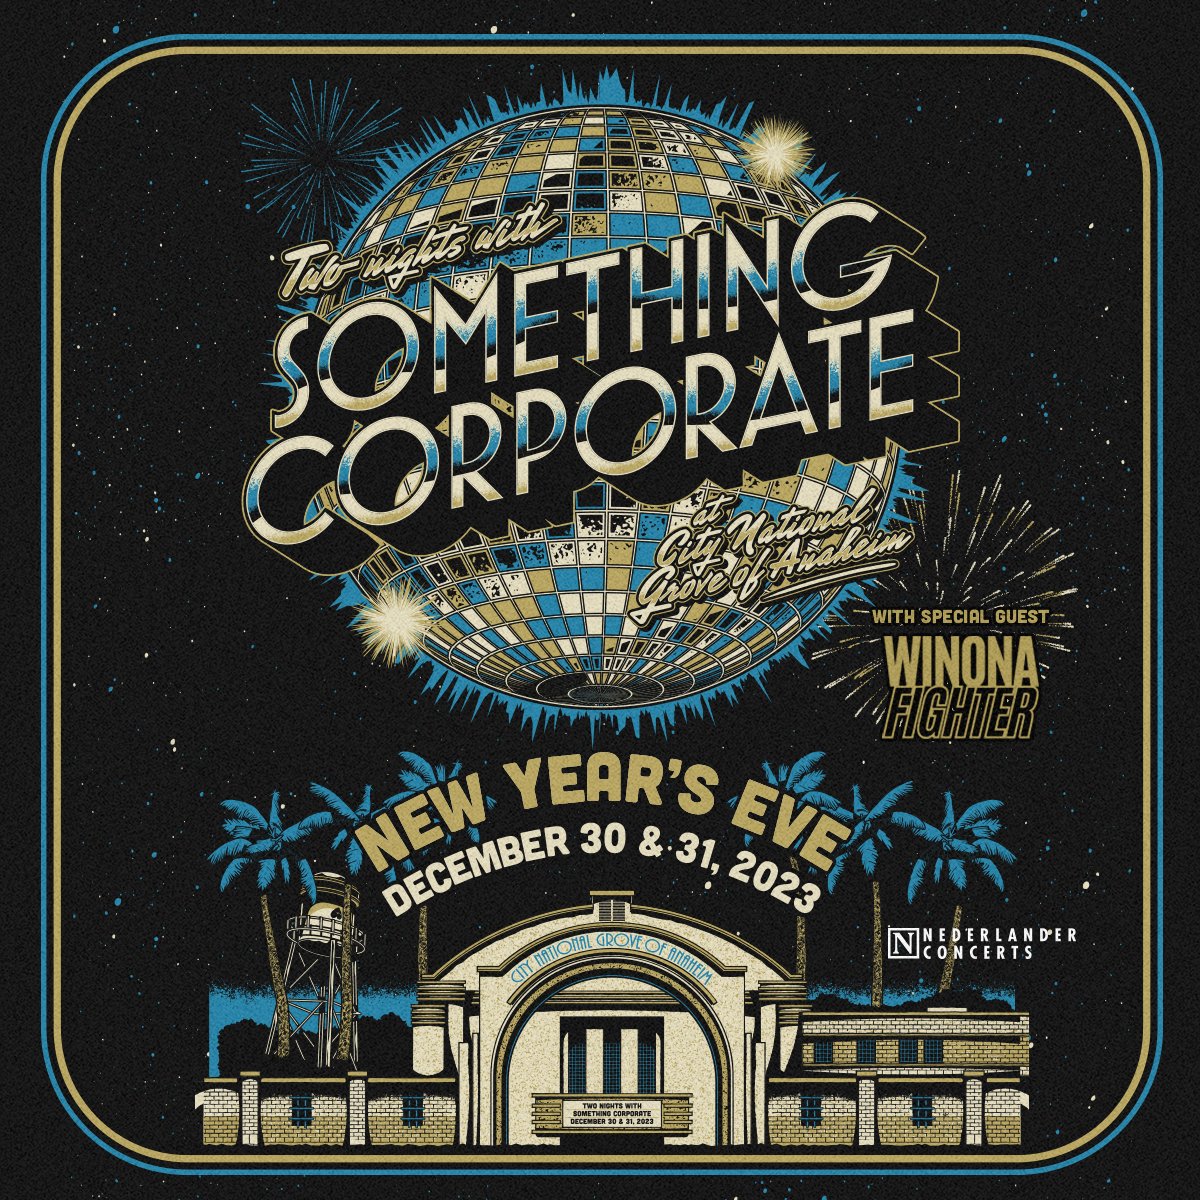 We’re coming home for New Years Eve! somethingcorporate.com Registration to purchase tickets starts now through ‘Ticketmaster Request’ and remains open until Monday, 11/13 at 12pm PT. Tickets will be confirmed on Wednesday, 11/15. Visit the link for more details.